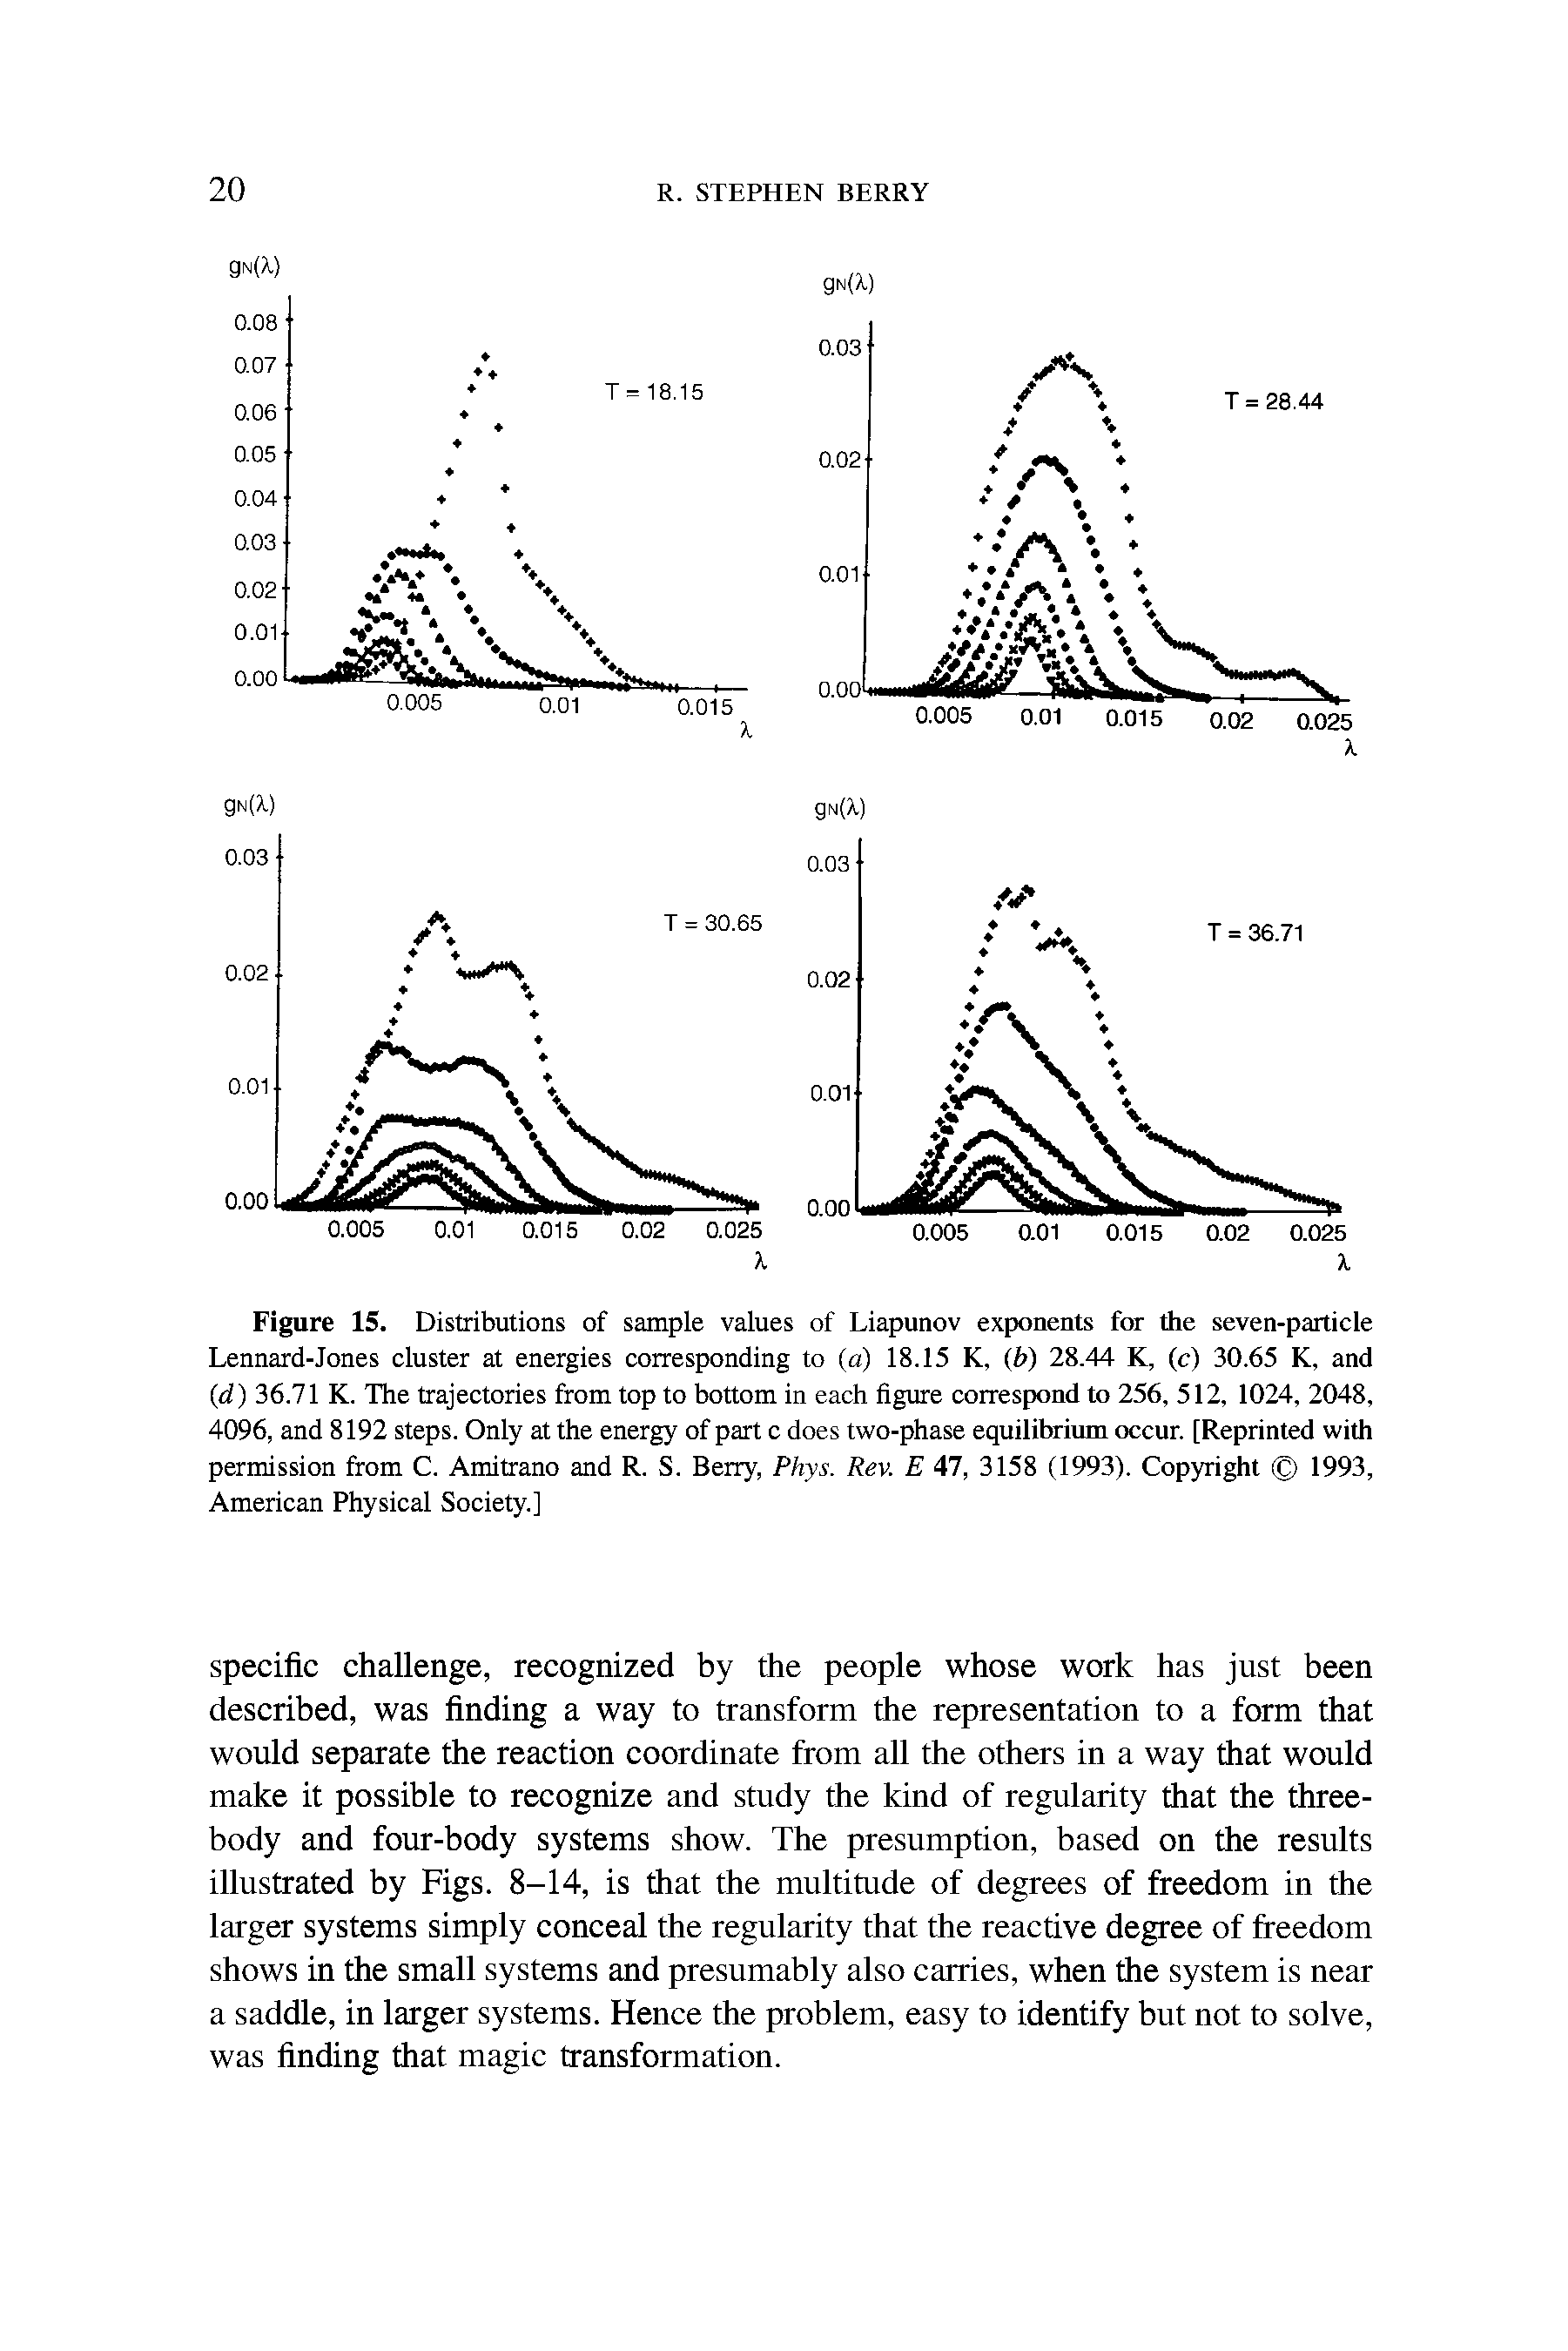 Figure 15. Distributions of sample values of Liapunov exponents for the seven-particle Lennard-Jones cluster at energies corresponding to (a) 18.15 K, (b) 28.44 K, (c) 30.65 K, and (d) 36.71 K. The trajectories from top to bottom in each figure correspond to 256, 512, 1024, 2048, 4096, and 8192 steps. Only at the energy of part c does two-phase equilibrium occur. [Reprinted with permission from C. Amitrano and R. S. Berry, Phys. Rev. E 47, 3158 (1993). Copyright 1993, American Physical Society.]...